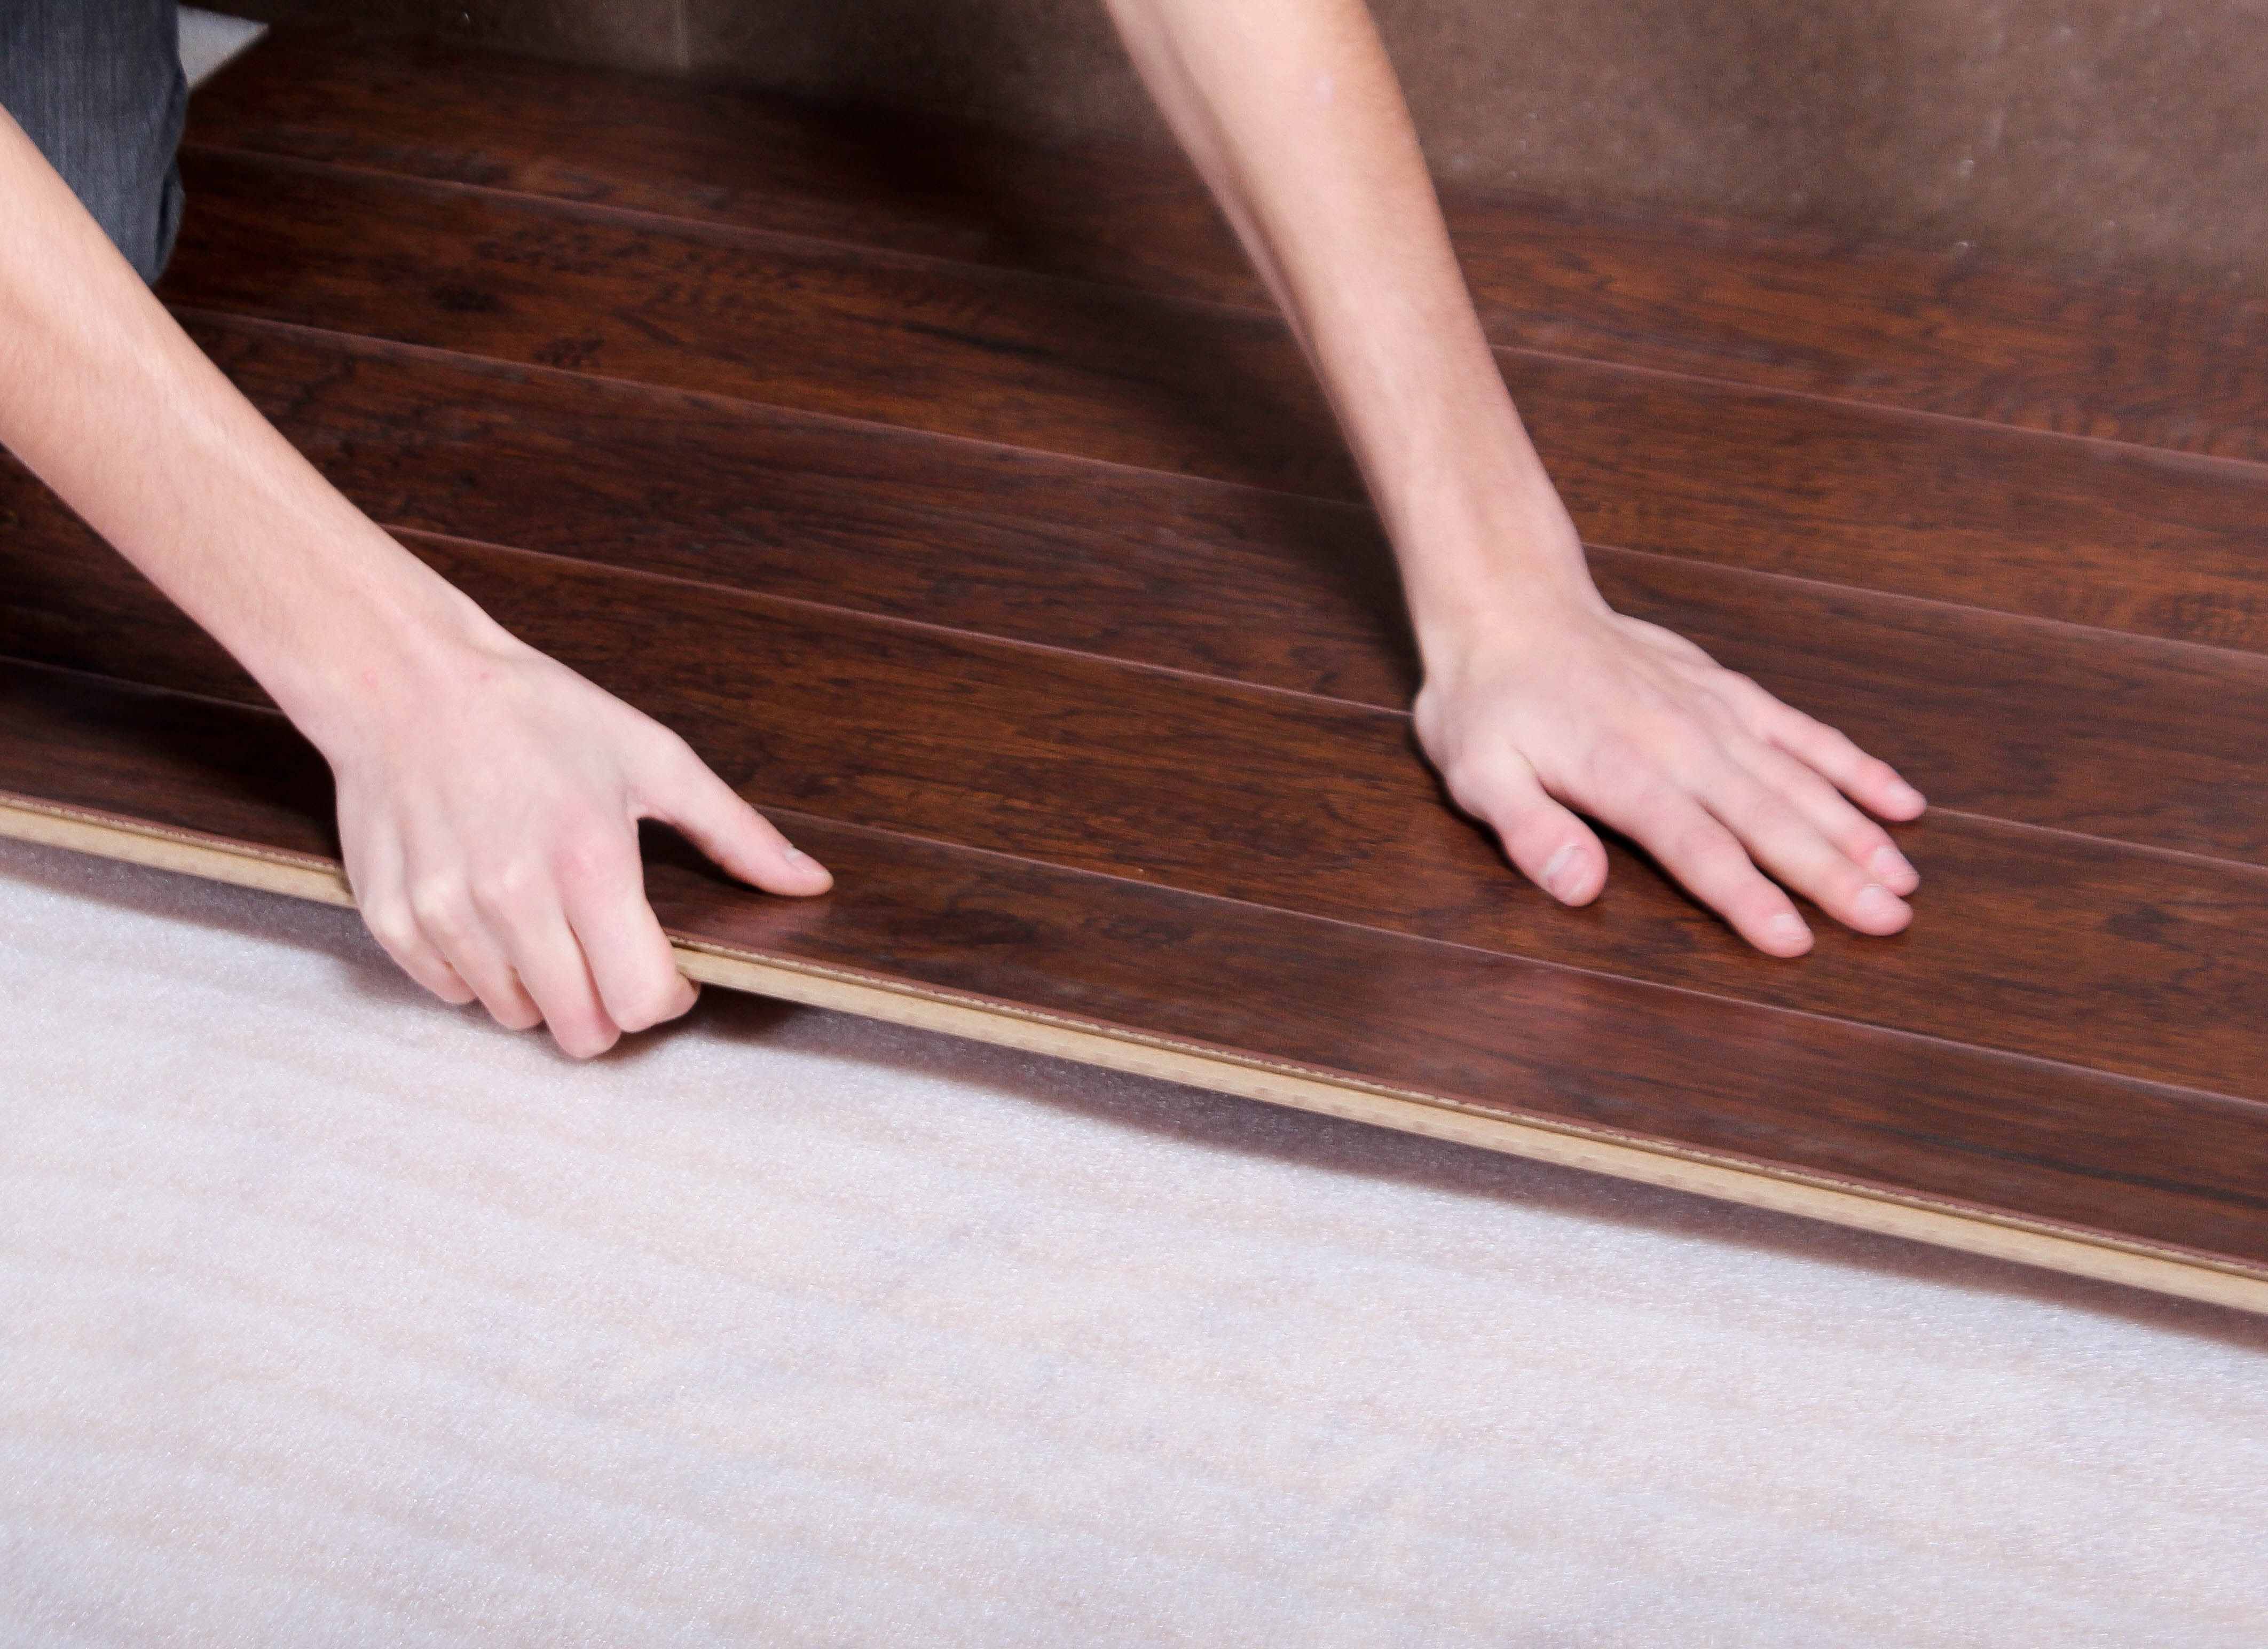 21 Awesome Filling Large Gaps In Hardwood Floors 2024 free download filling large gaps in hardwood floors of how to fix laminate flooring that is buckling floor in how to fix laminate flooring that is buckling what size expansion gap should be left when